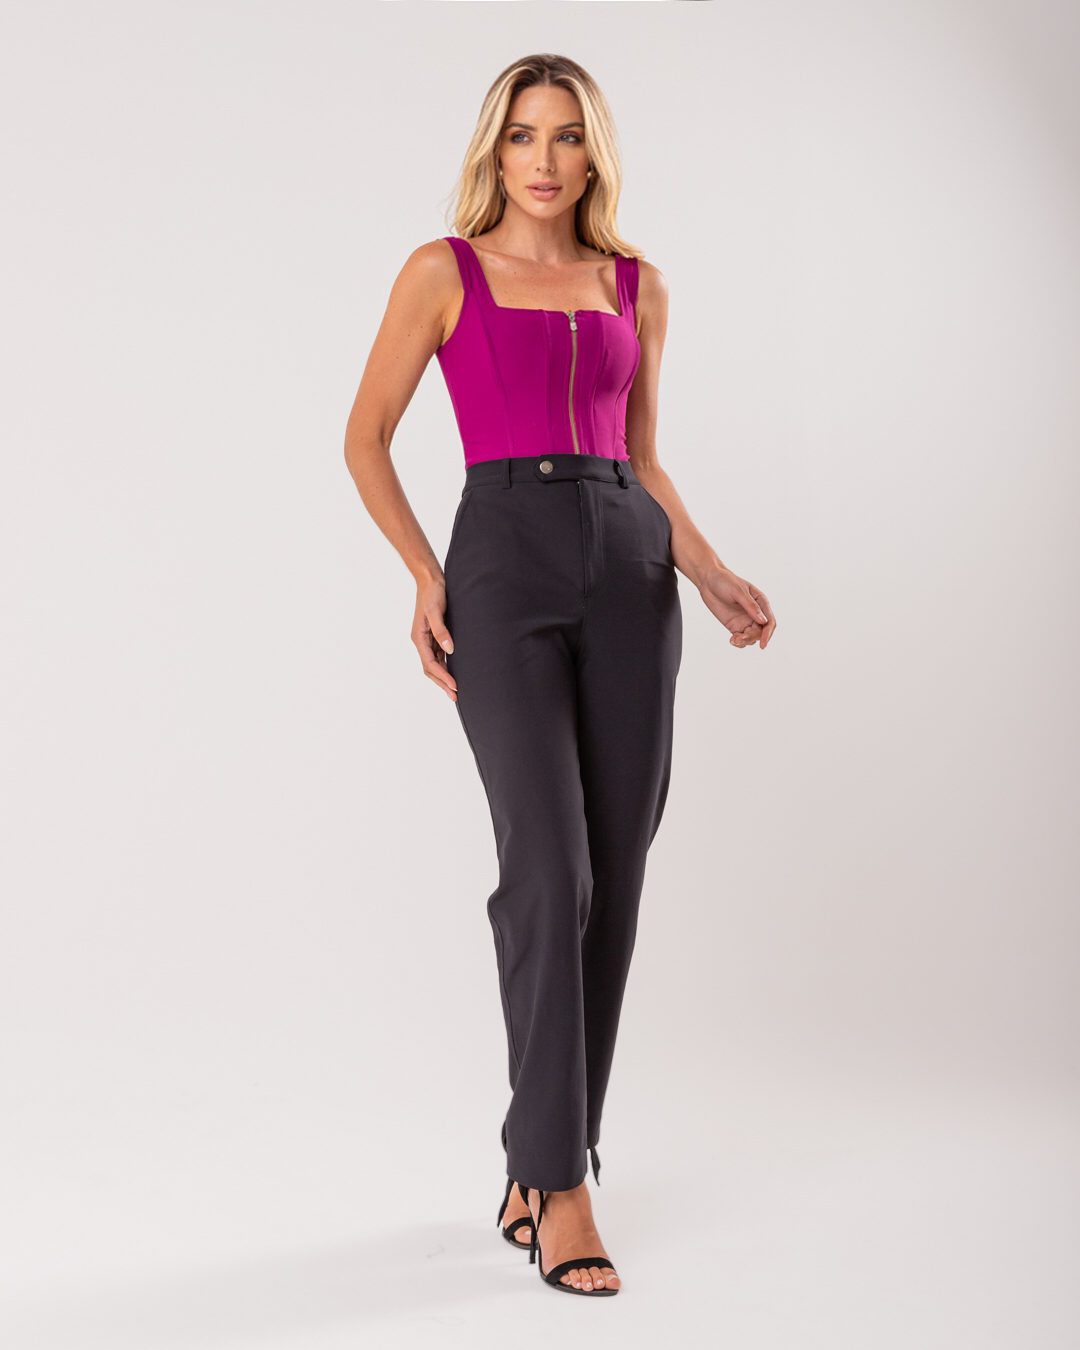 Miss Misses - Miss Misses Pants With Pockets Straight Black - 54040001